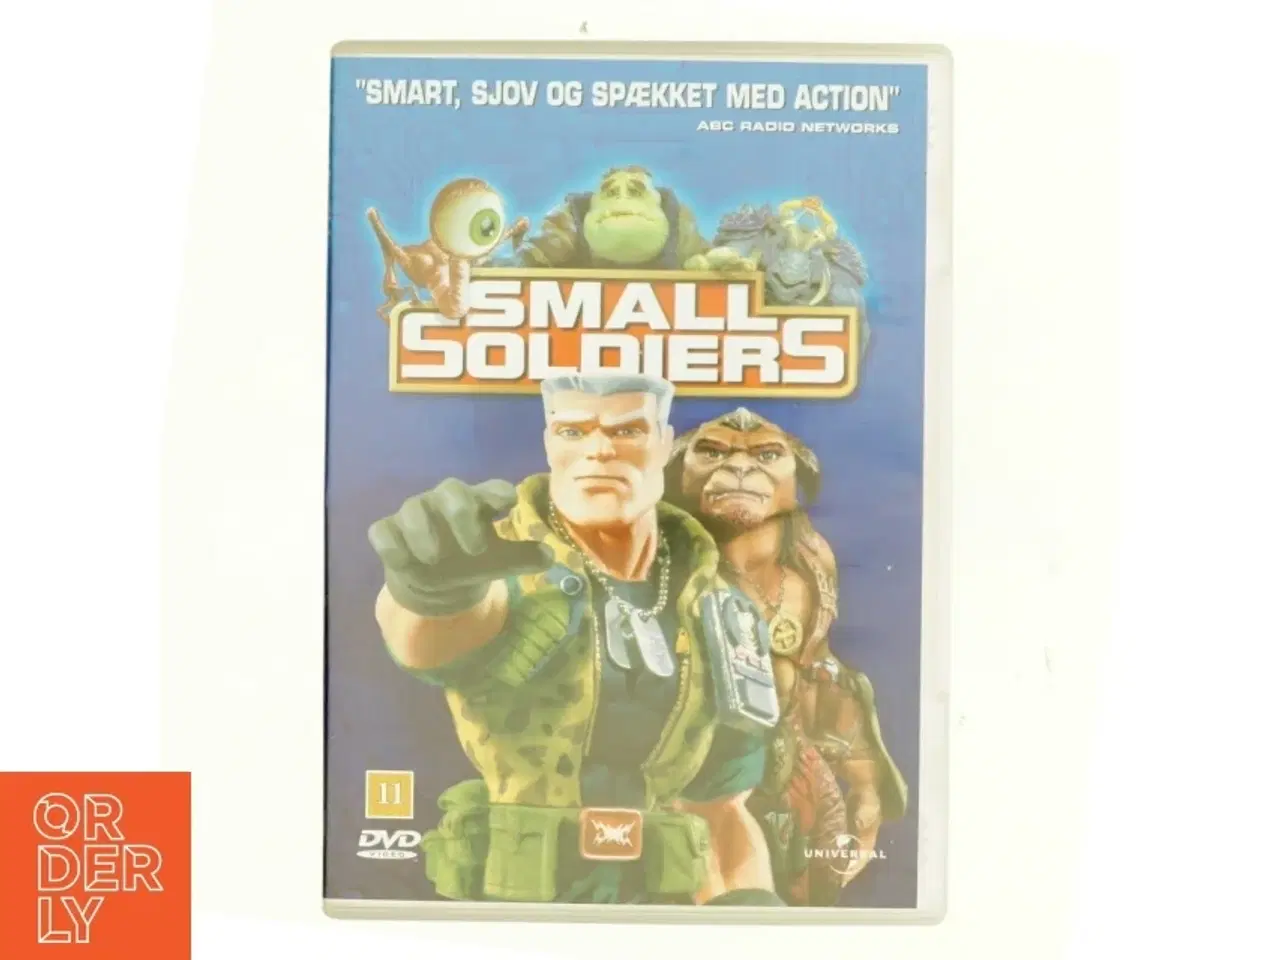 Billede 1 - Small soldiers